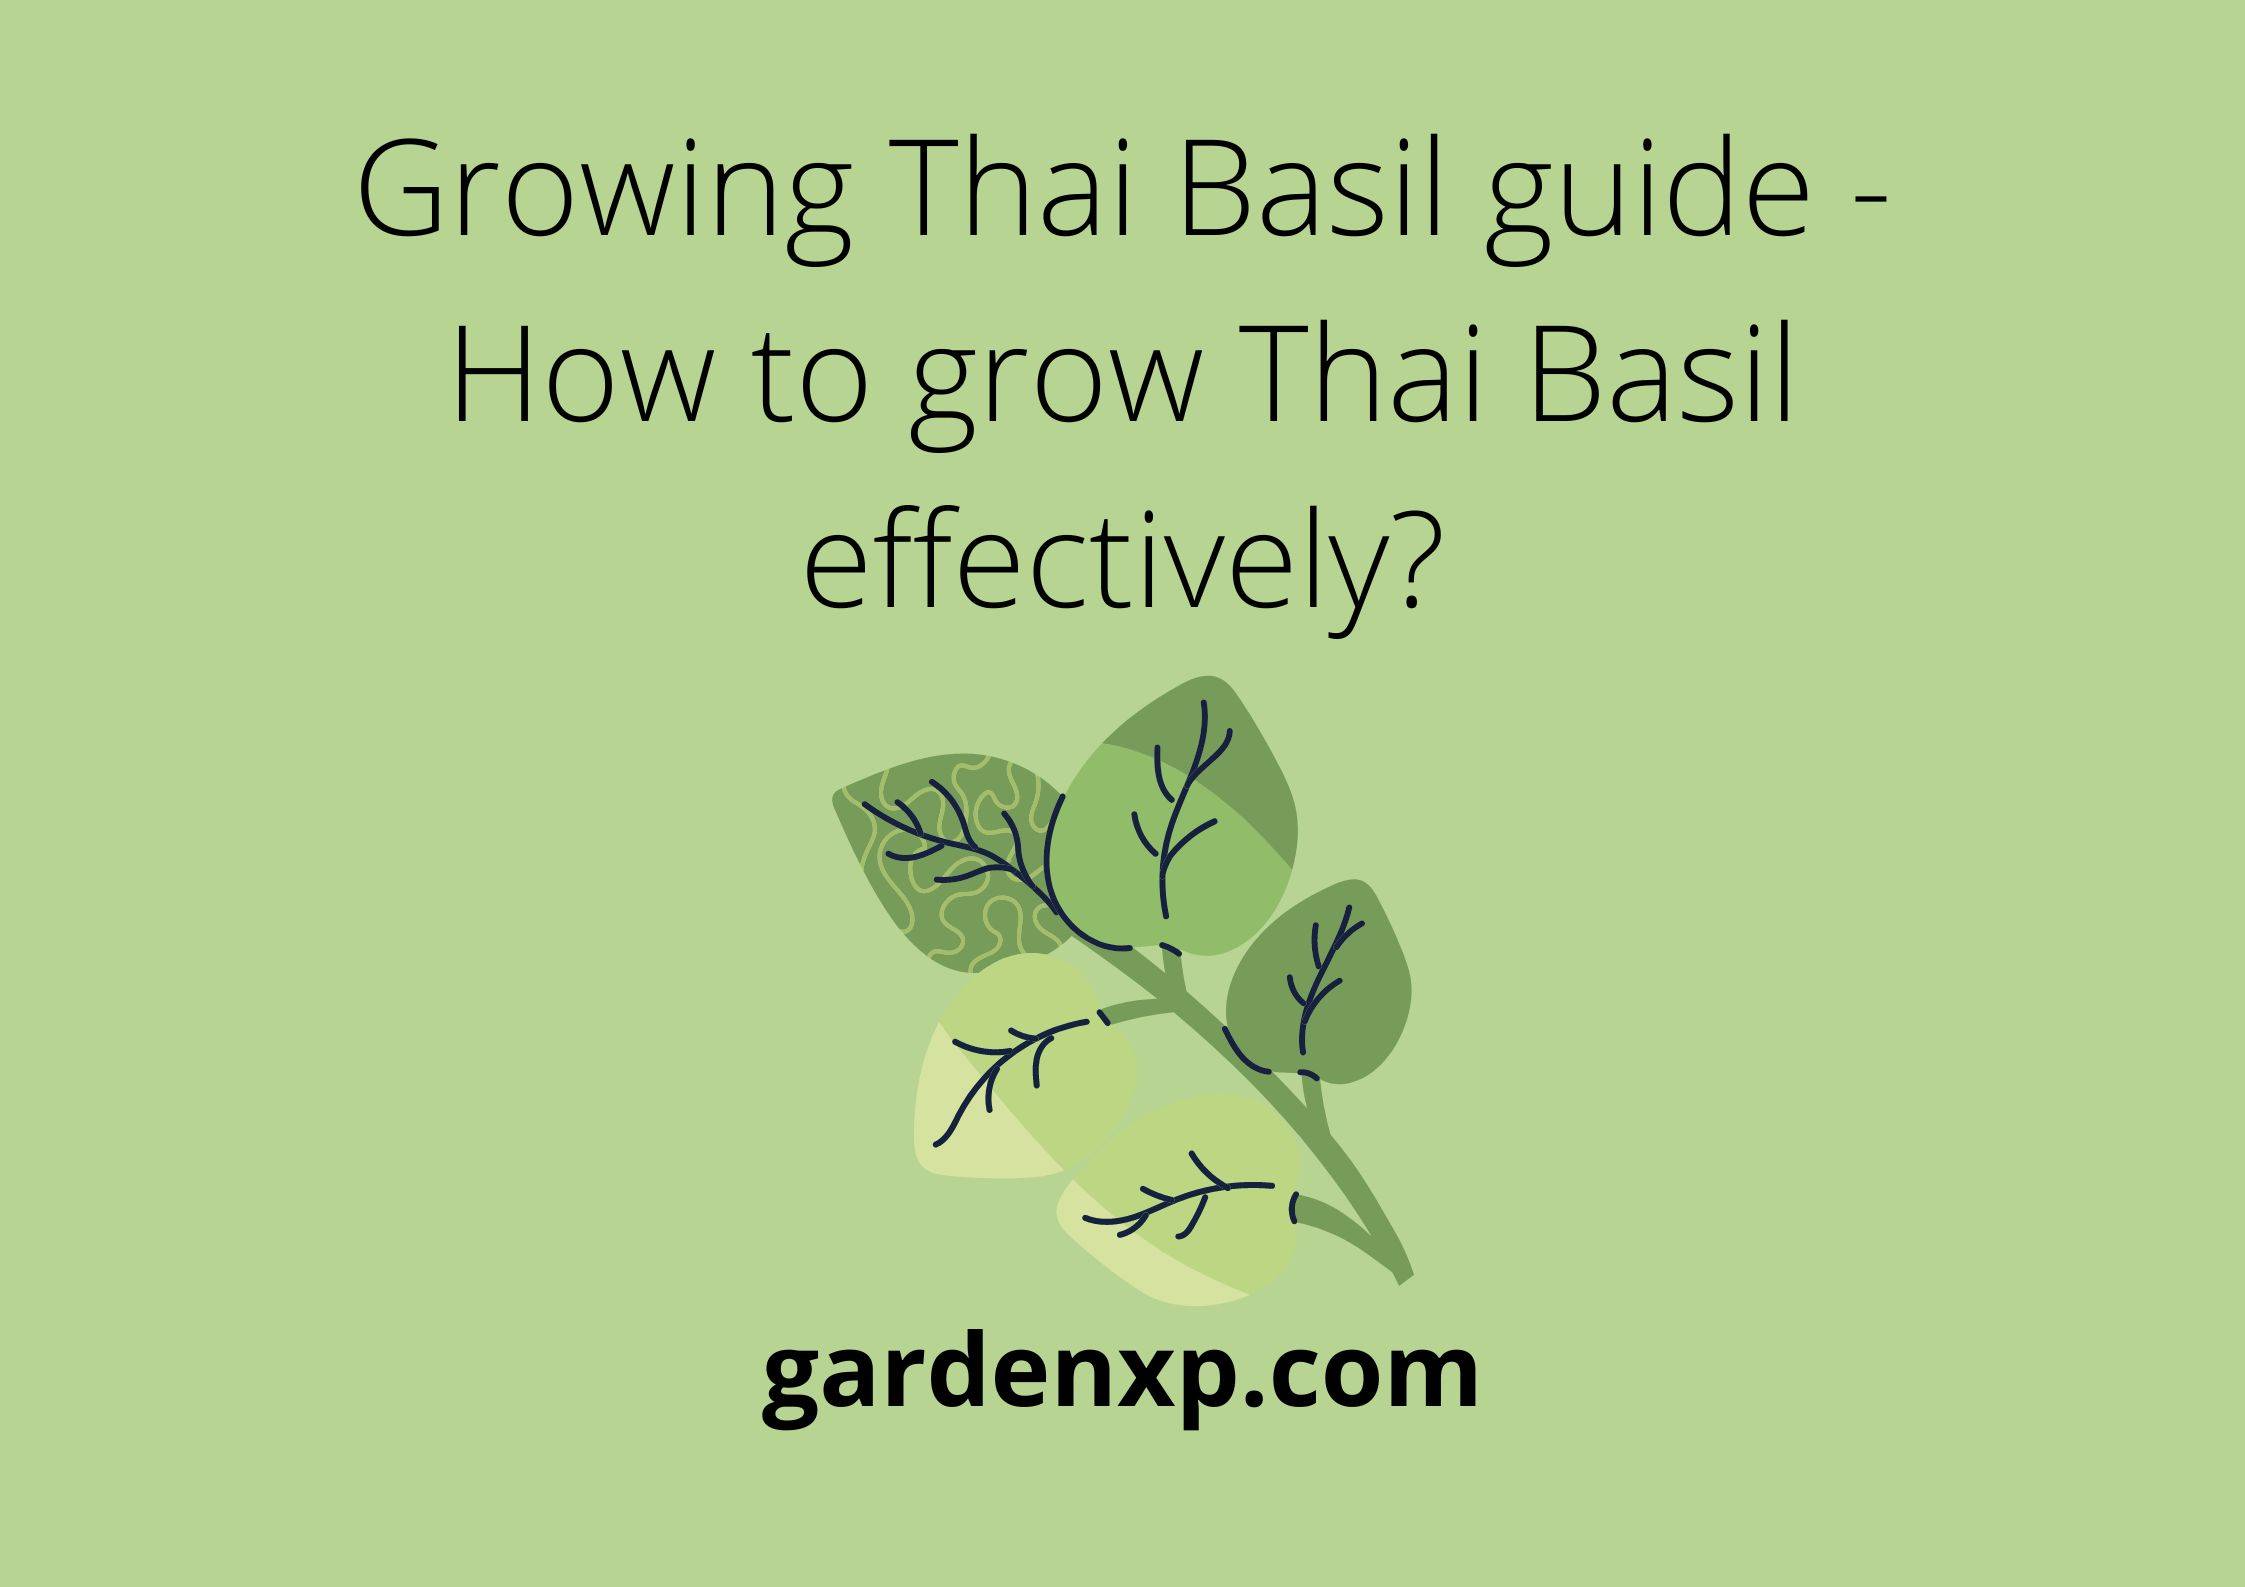 Growing Thai Basil guide - How to grow Thai Basil effectively?